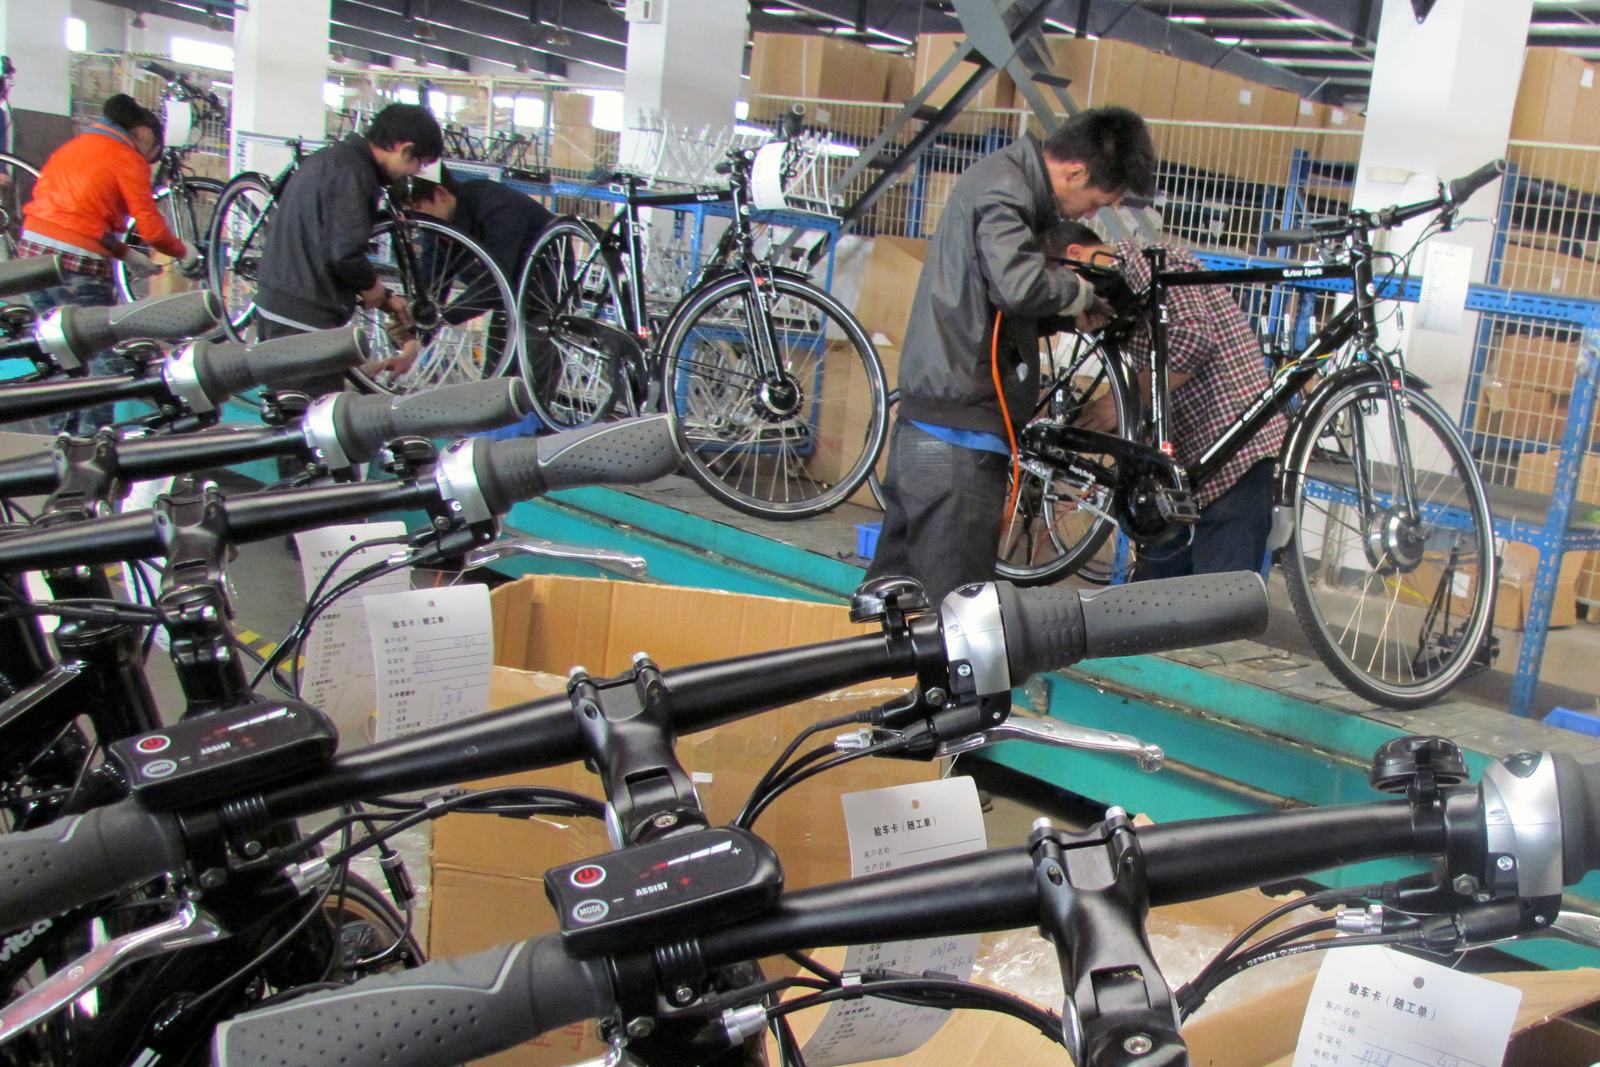 China is commonly considered as a sourcing country for e-bikes and components, but not yet as an export destination for high end products. That’s to change. - Photo Bike Europe